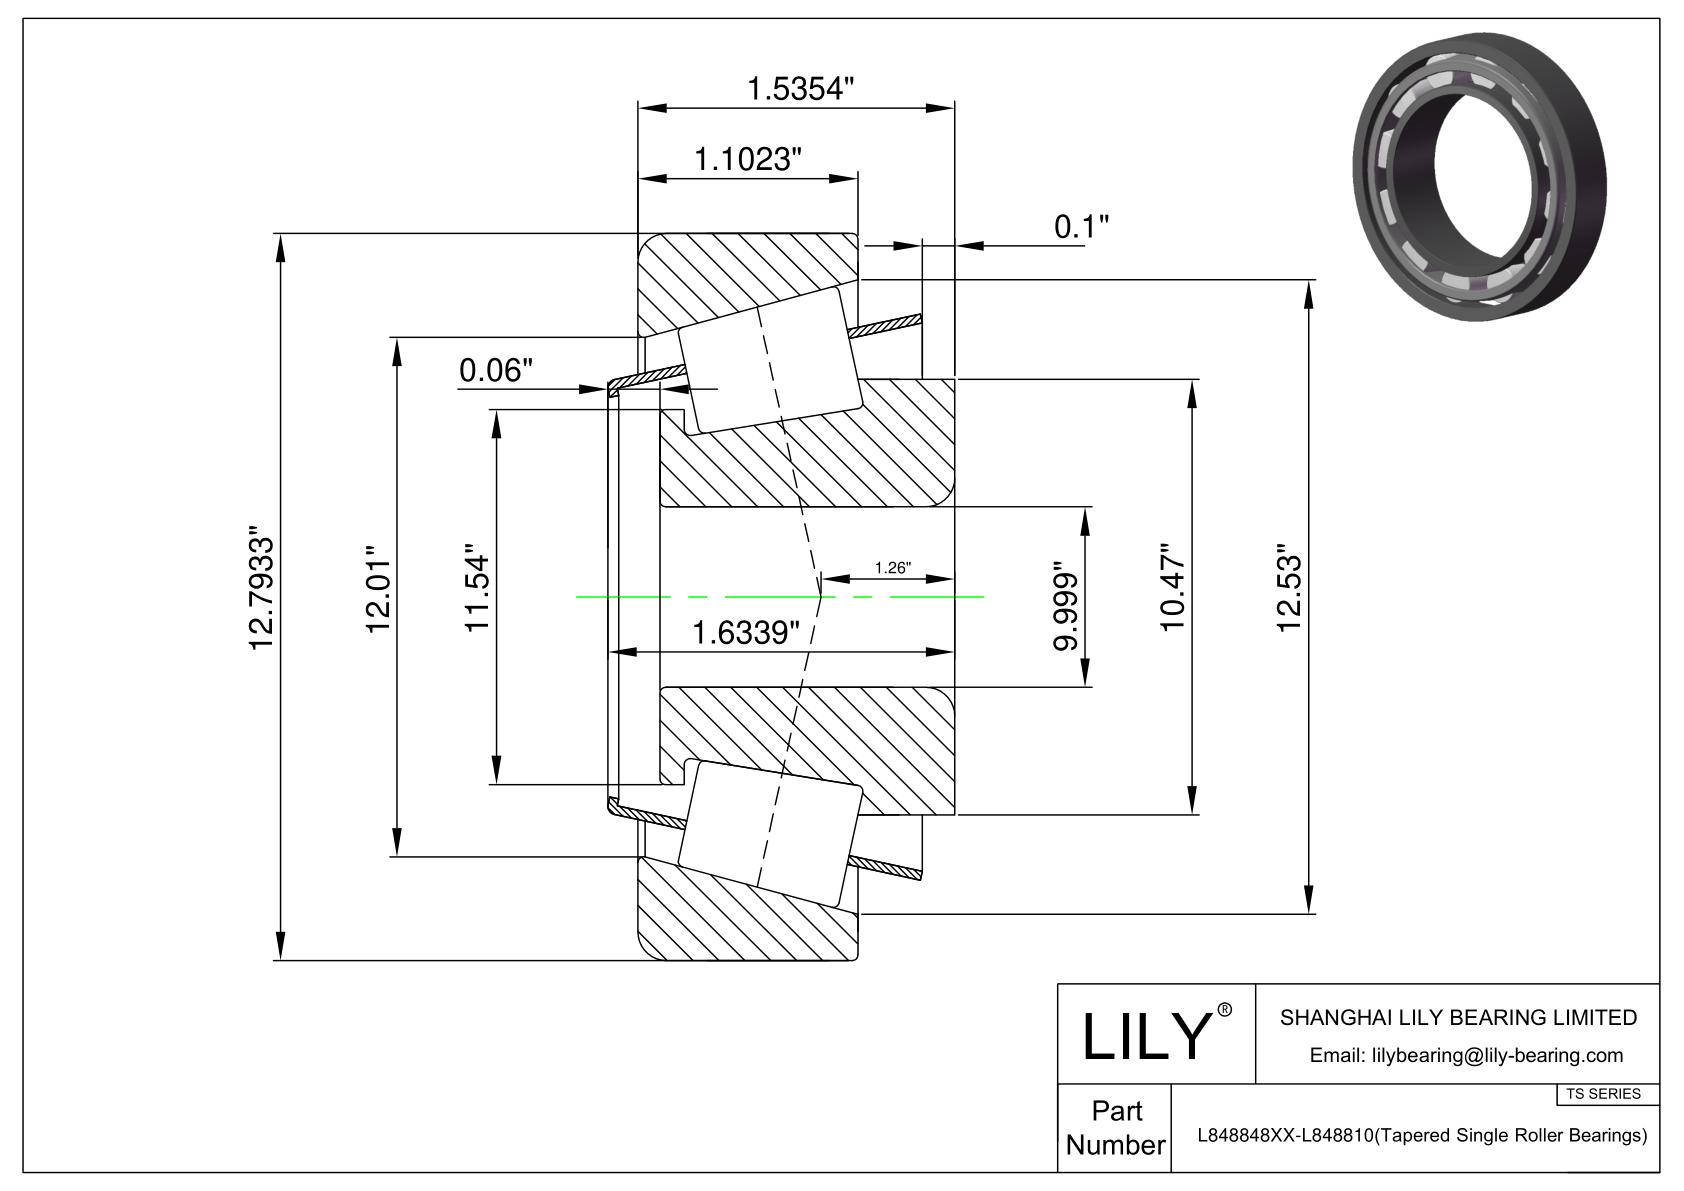 L848848XX-L848810 TS (Tapered Single Roller Bearings) (Imperial) cad drawing